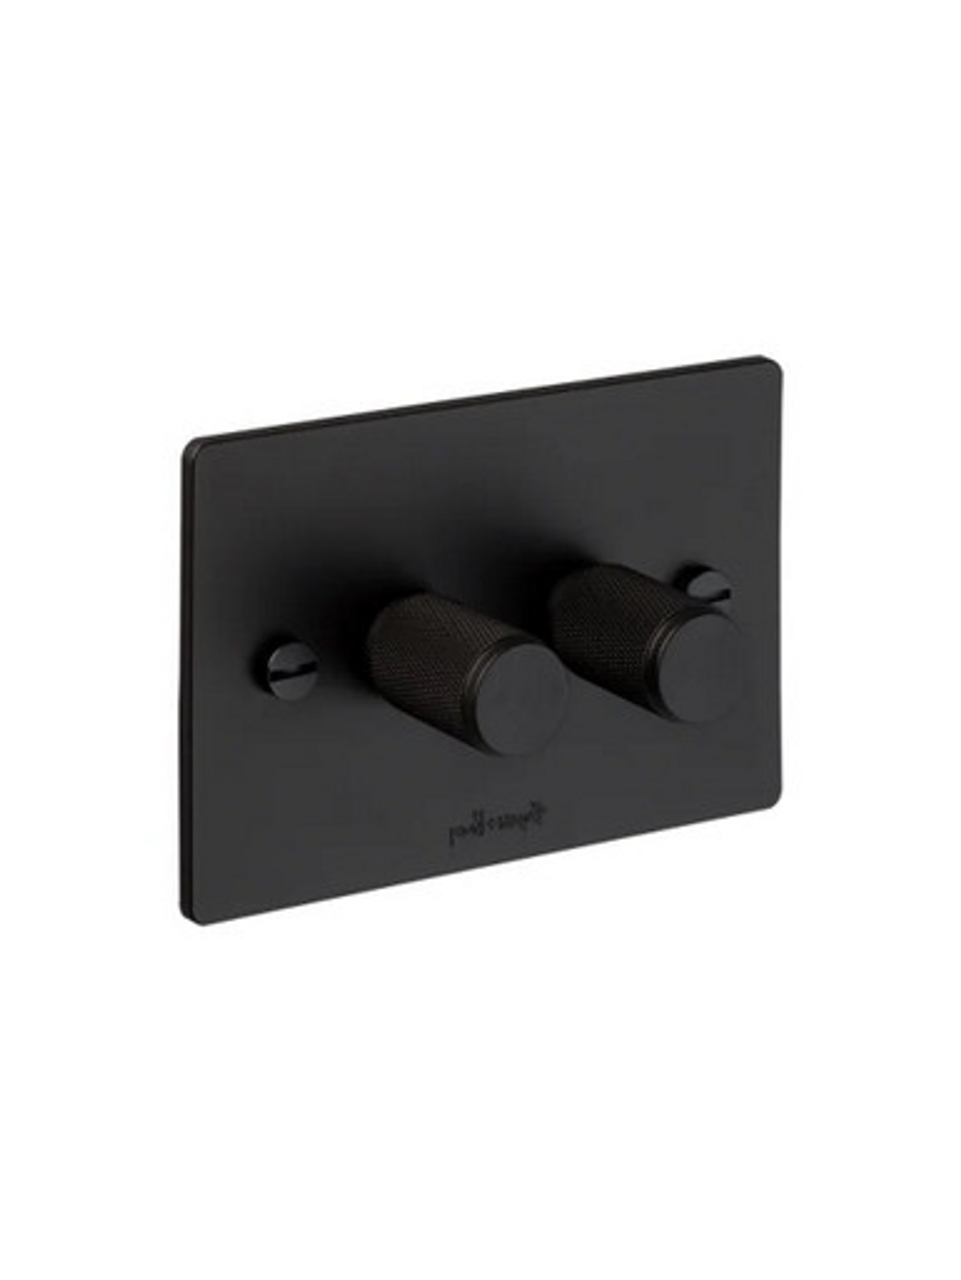 Buster + Punch twin-dimmer in black